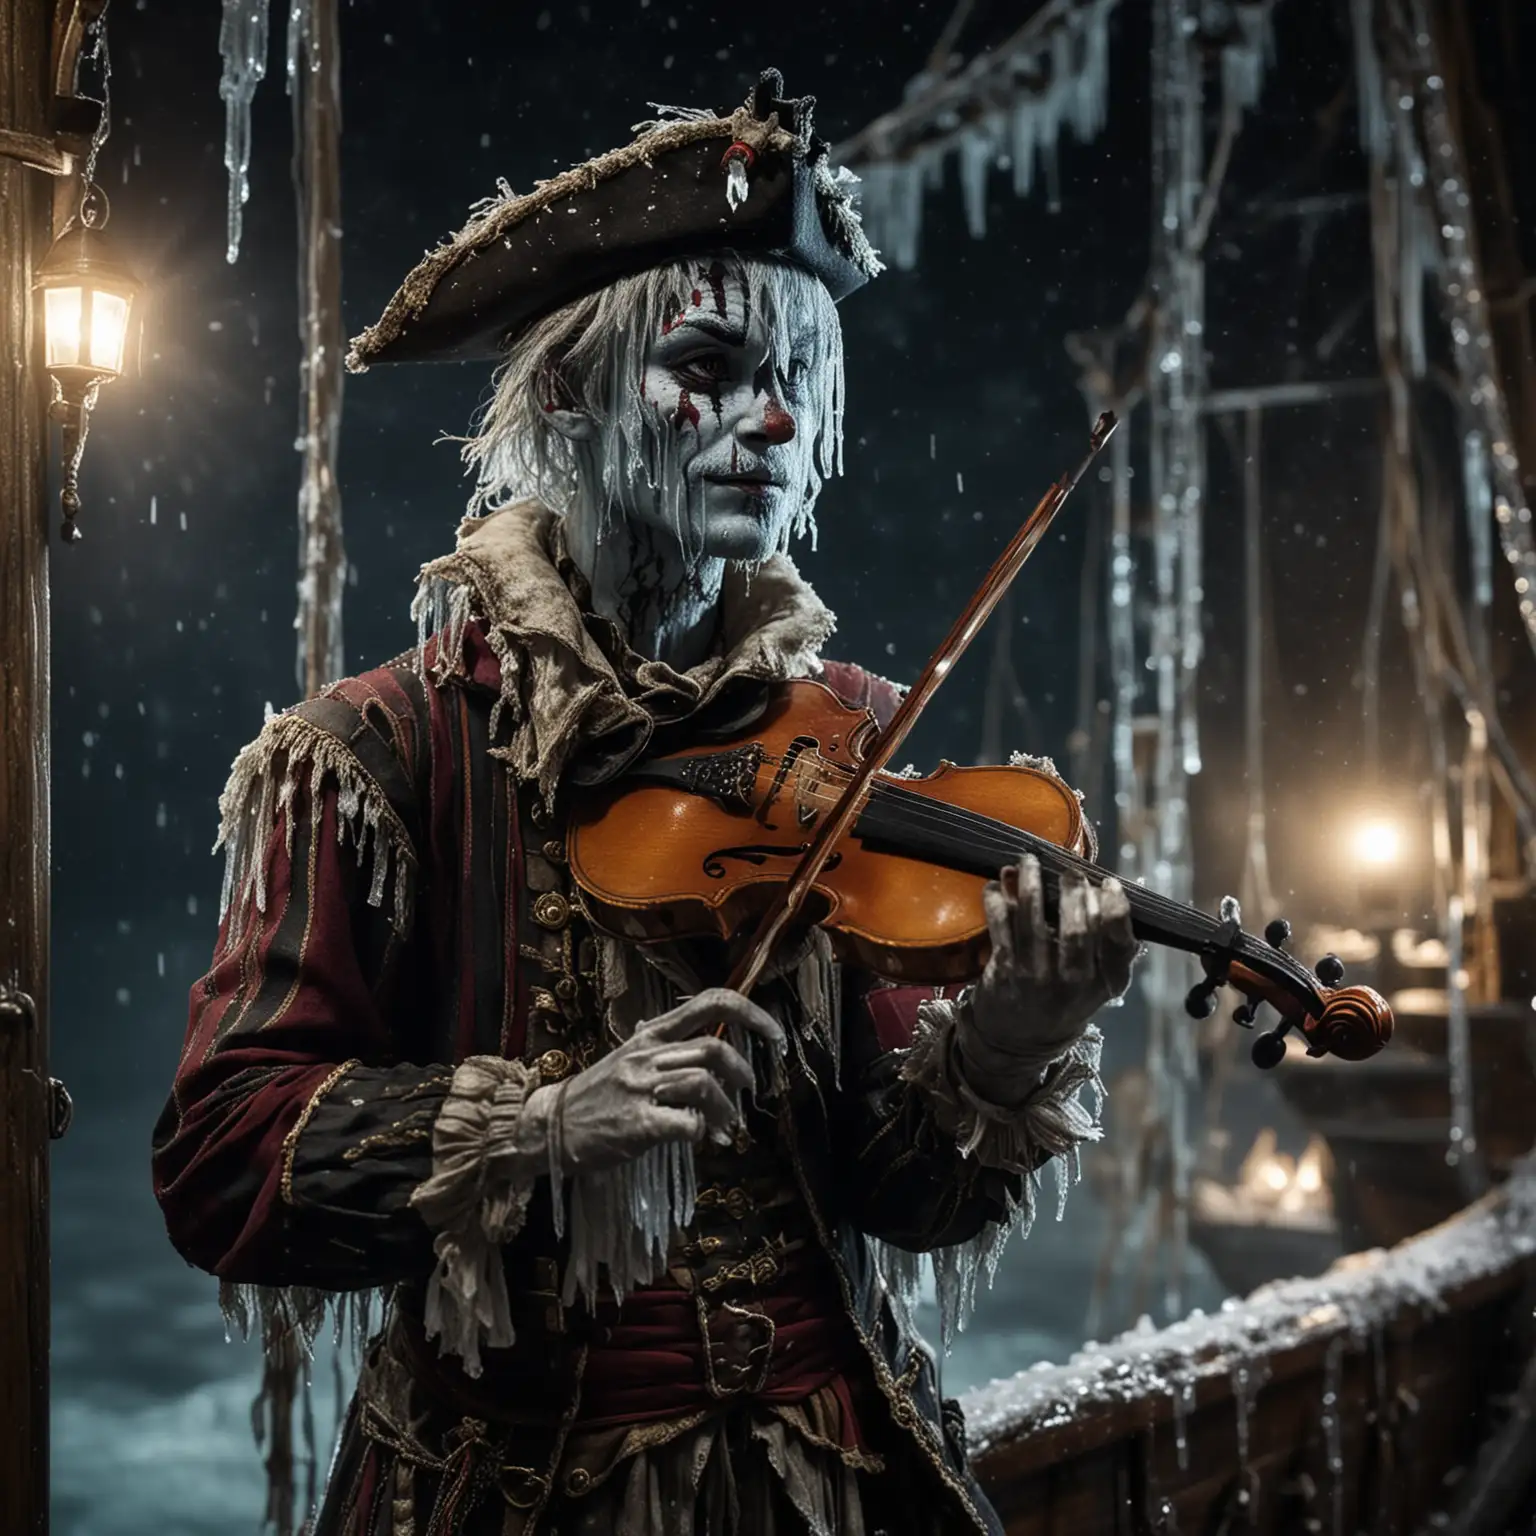 Frozen Harlequin Playing Violin on Pirate Ship at Night